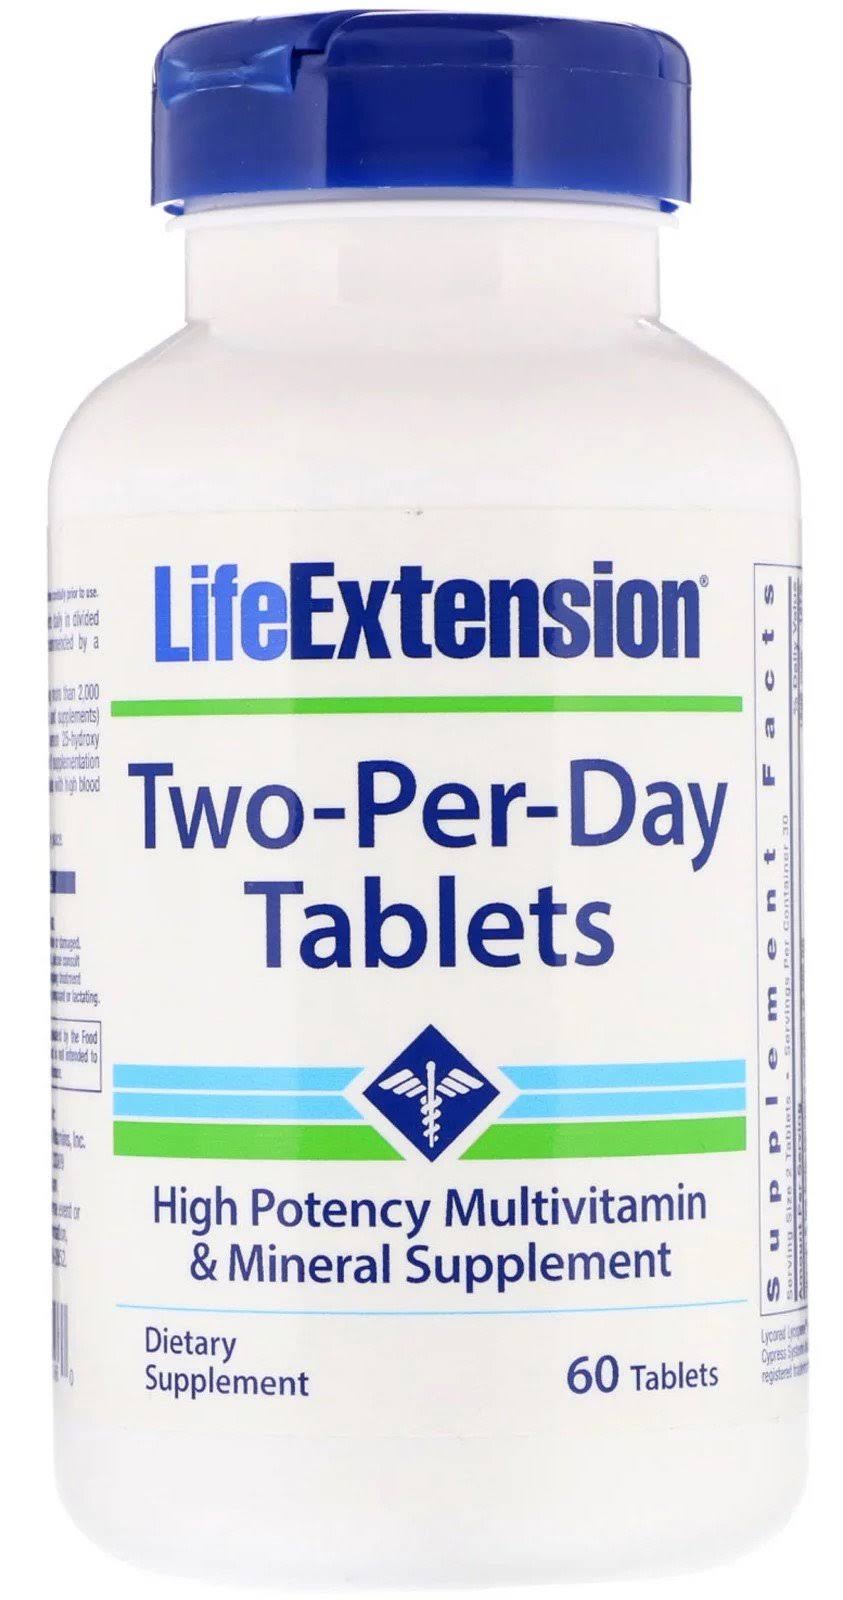 Life Extension Two-per-day Tablets Supplements - 60ct